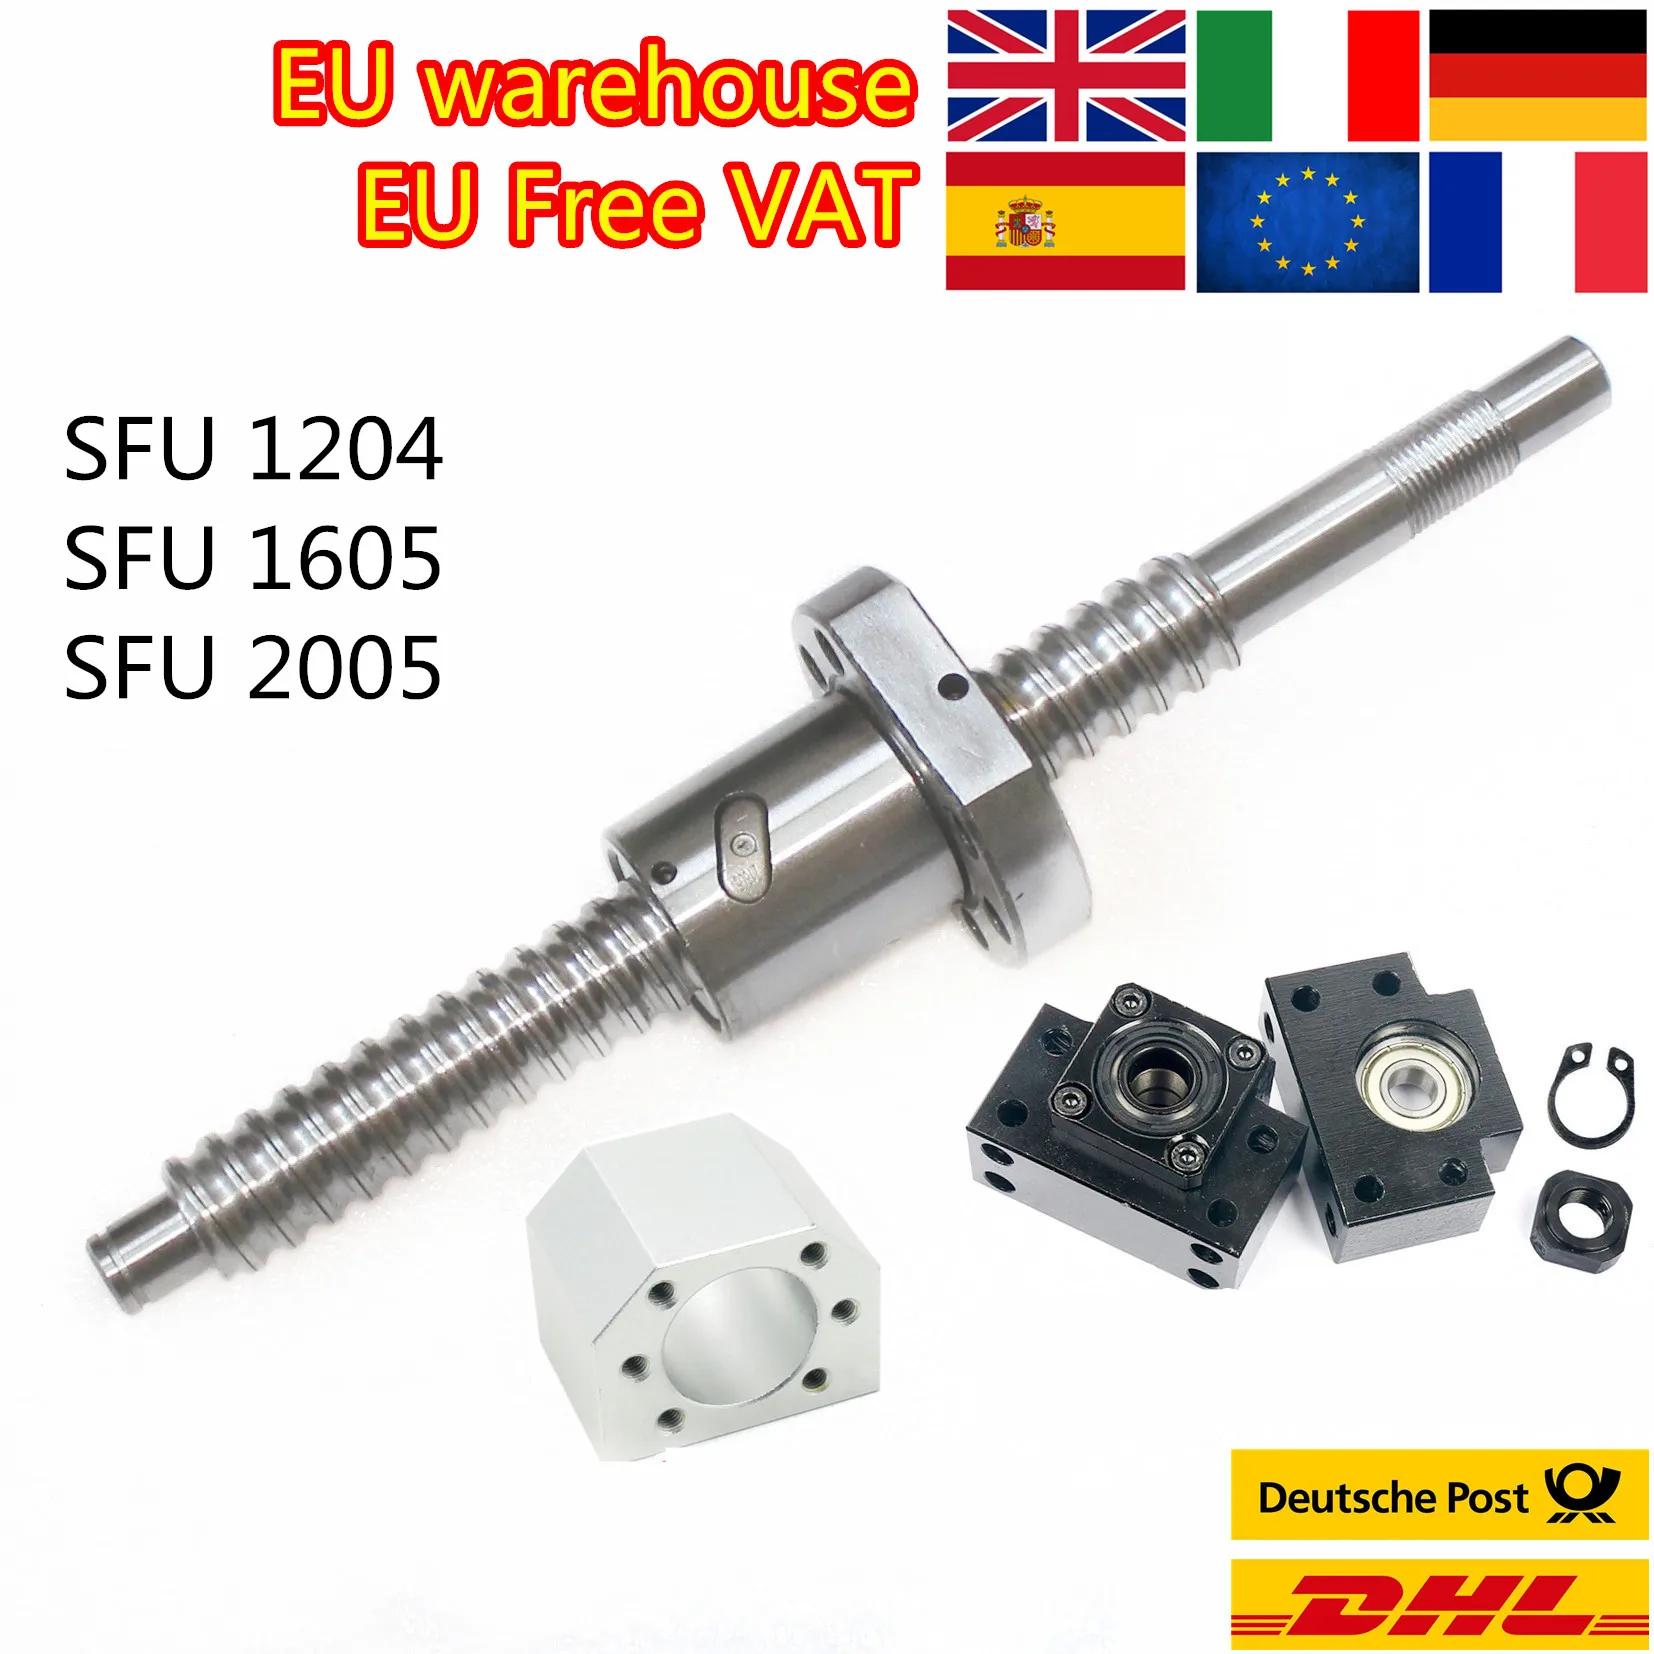 

「EU Free Ship」RM/SFU 1204 1605 2005 Ball Screw Kit 300mm -1050mm with End Machined & BK/BF End Support & Nut housing for CNC